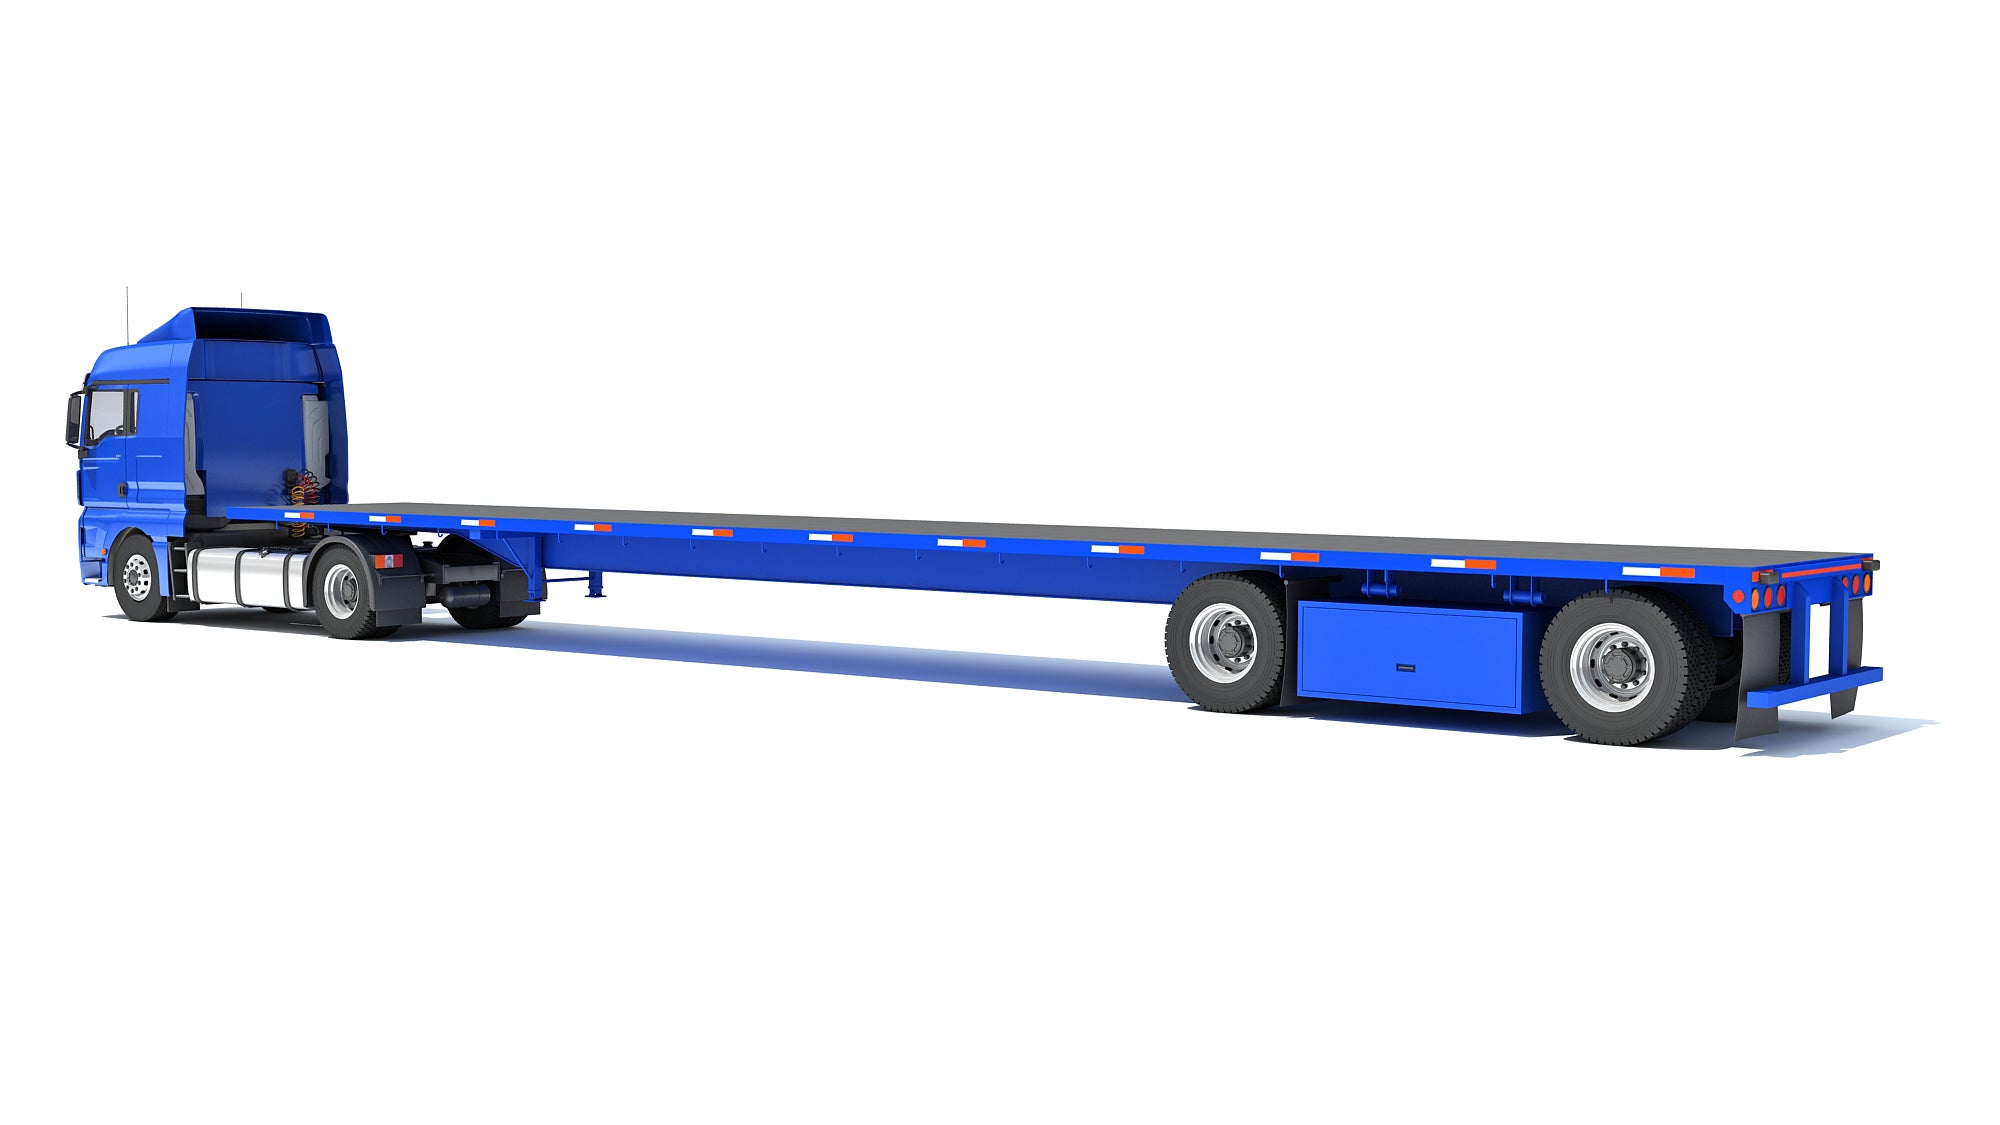 Freightliner Truck with Flatbed Trailer